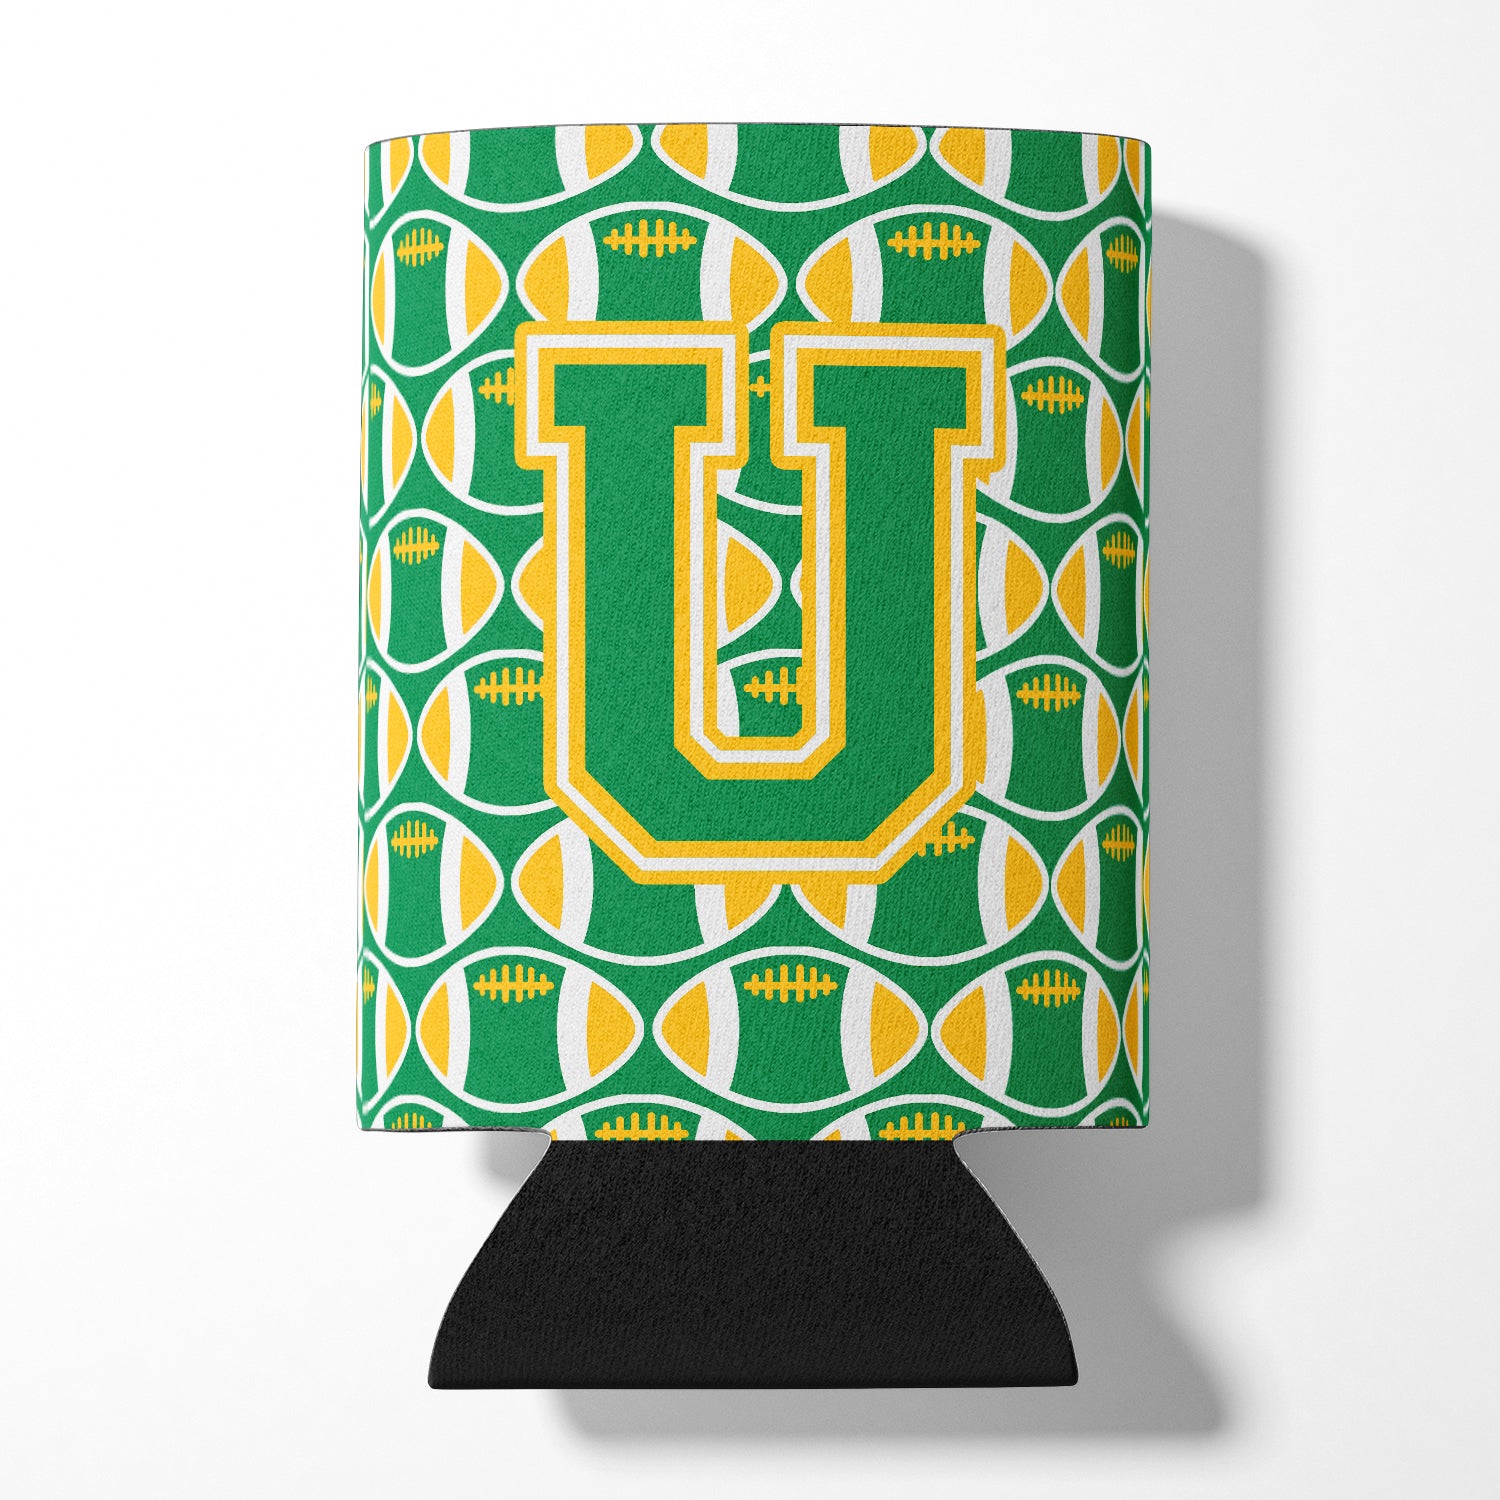 Letter U Football Green and Gold Can or Bottle Hugger CJ1069-UCC